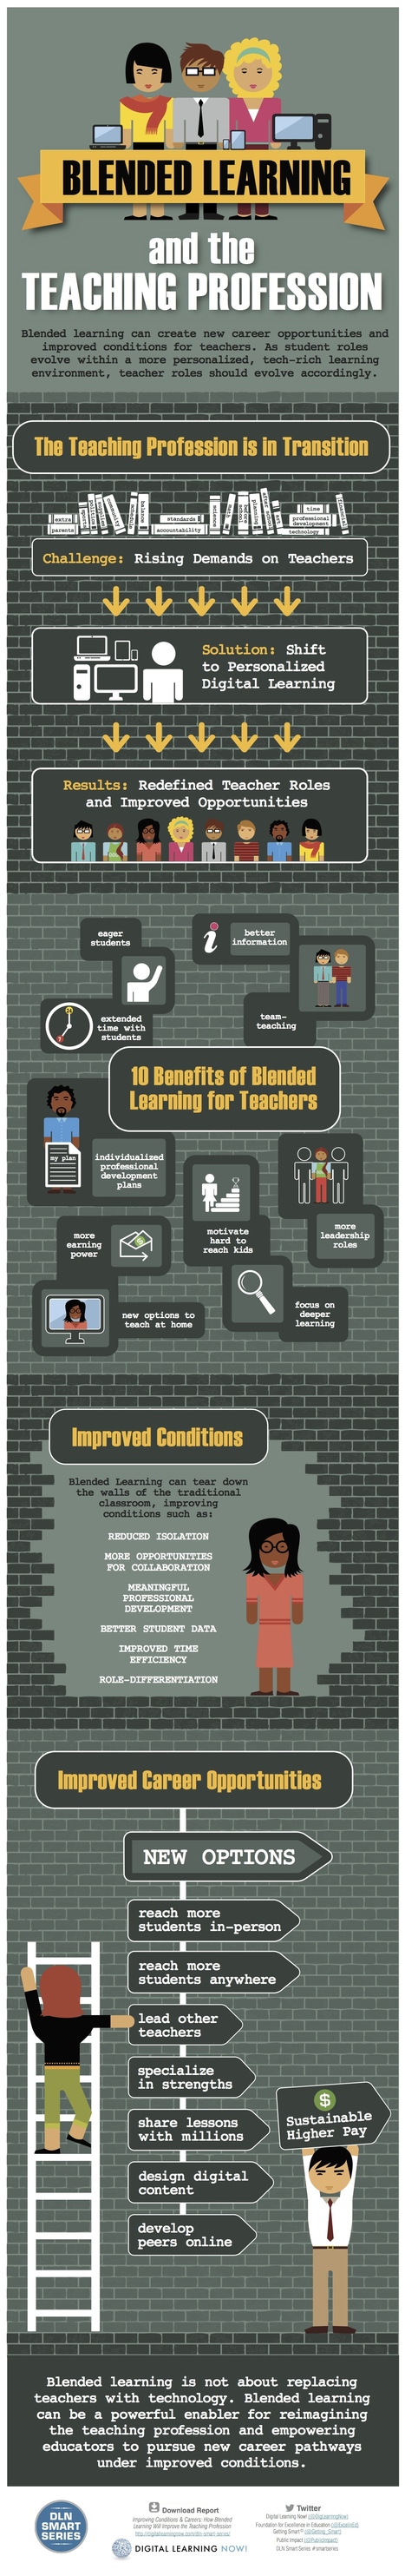 Blended Learning & The Teaching Profession [Infographic] | 21st Century Learning and Teaching | Scoop.it